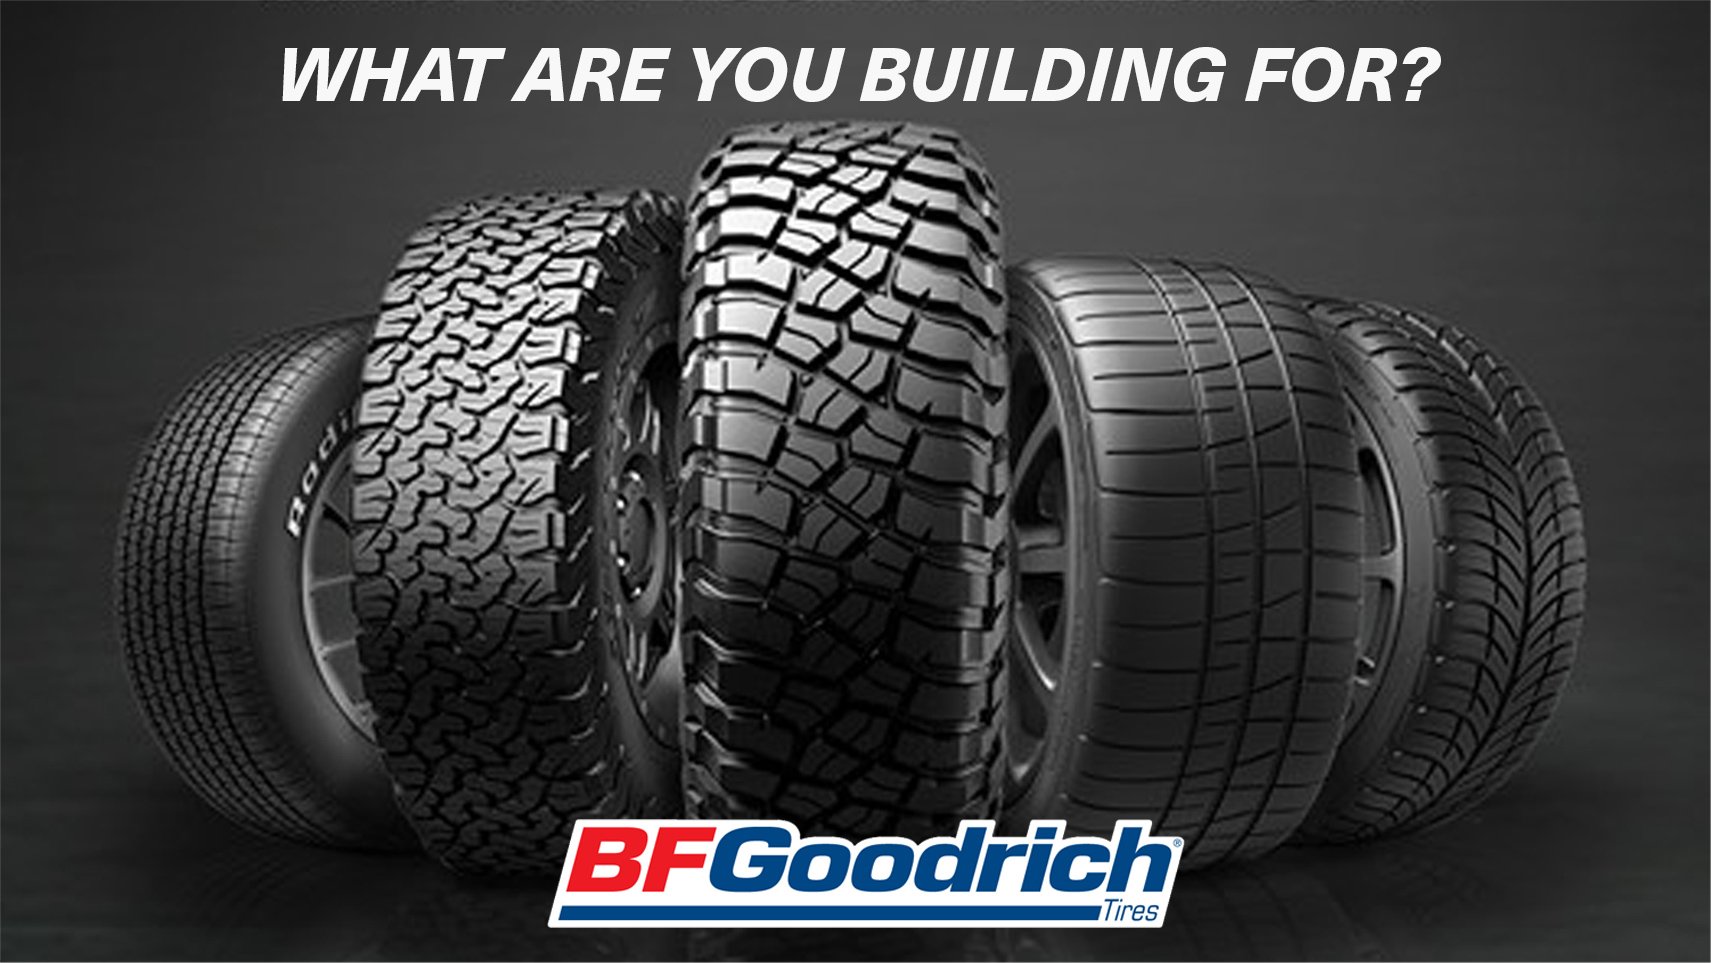 Shop The Largest Selection of BFGoodrich Tires - Only Available at 4 Wheel Parts